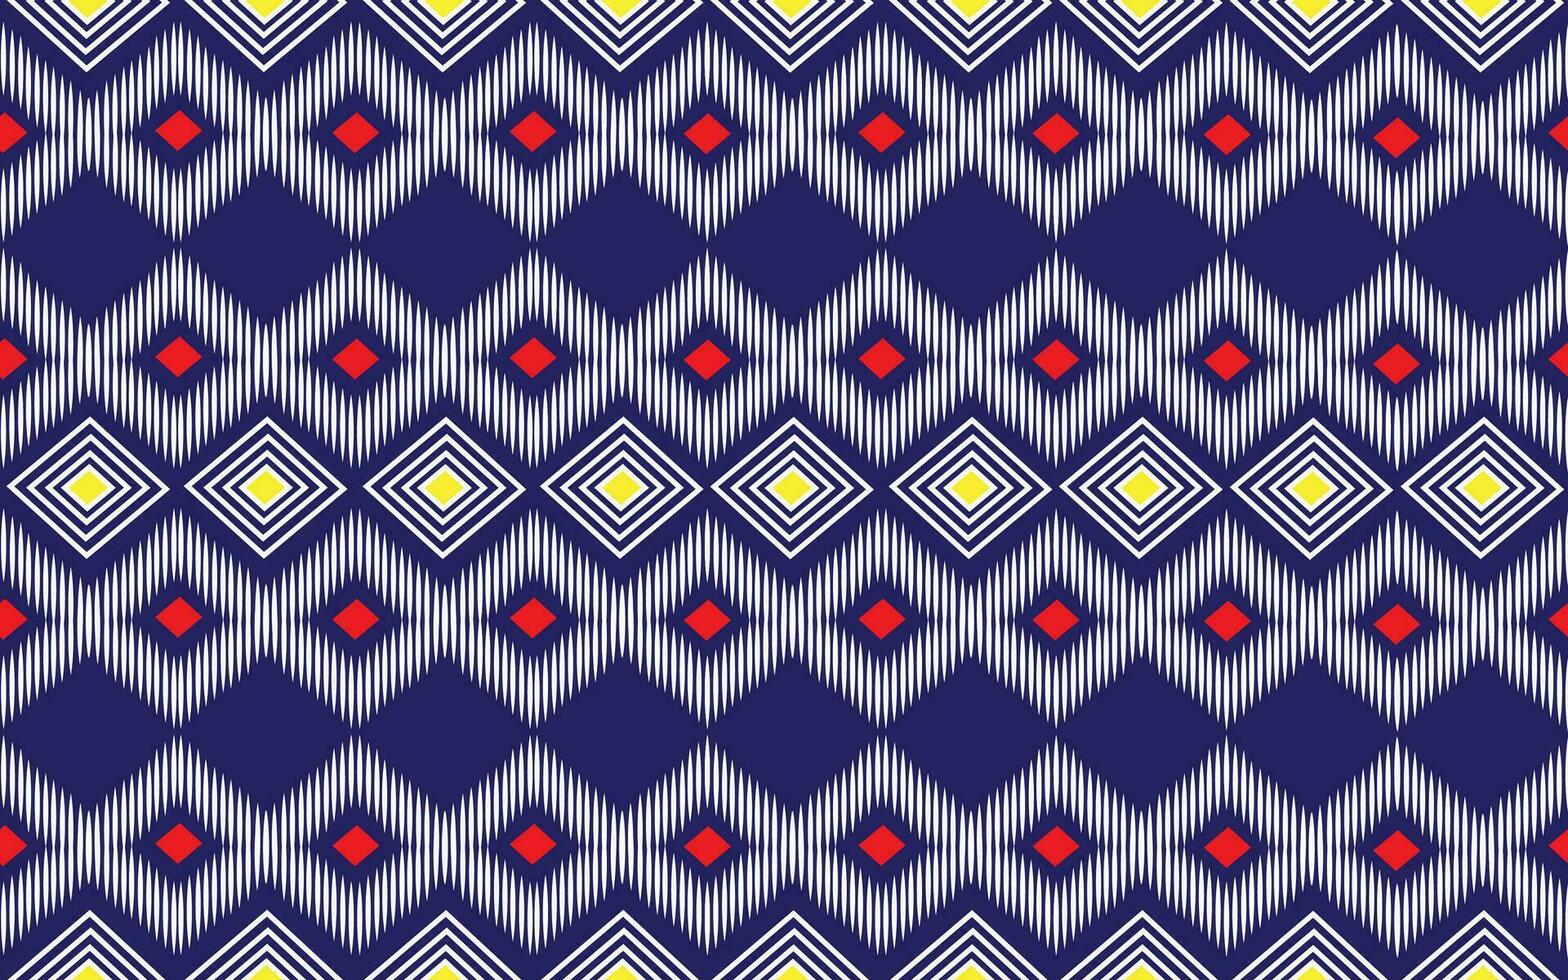 Geometry, abstract, fabric, textile, indigenous traditional seamless pattern on navy blue background. vector illustration.